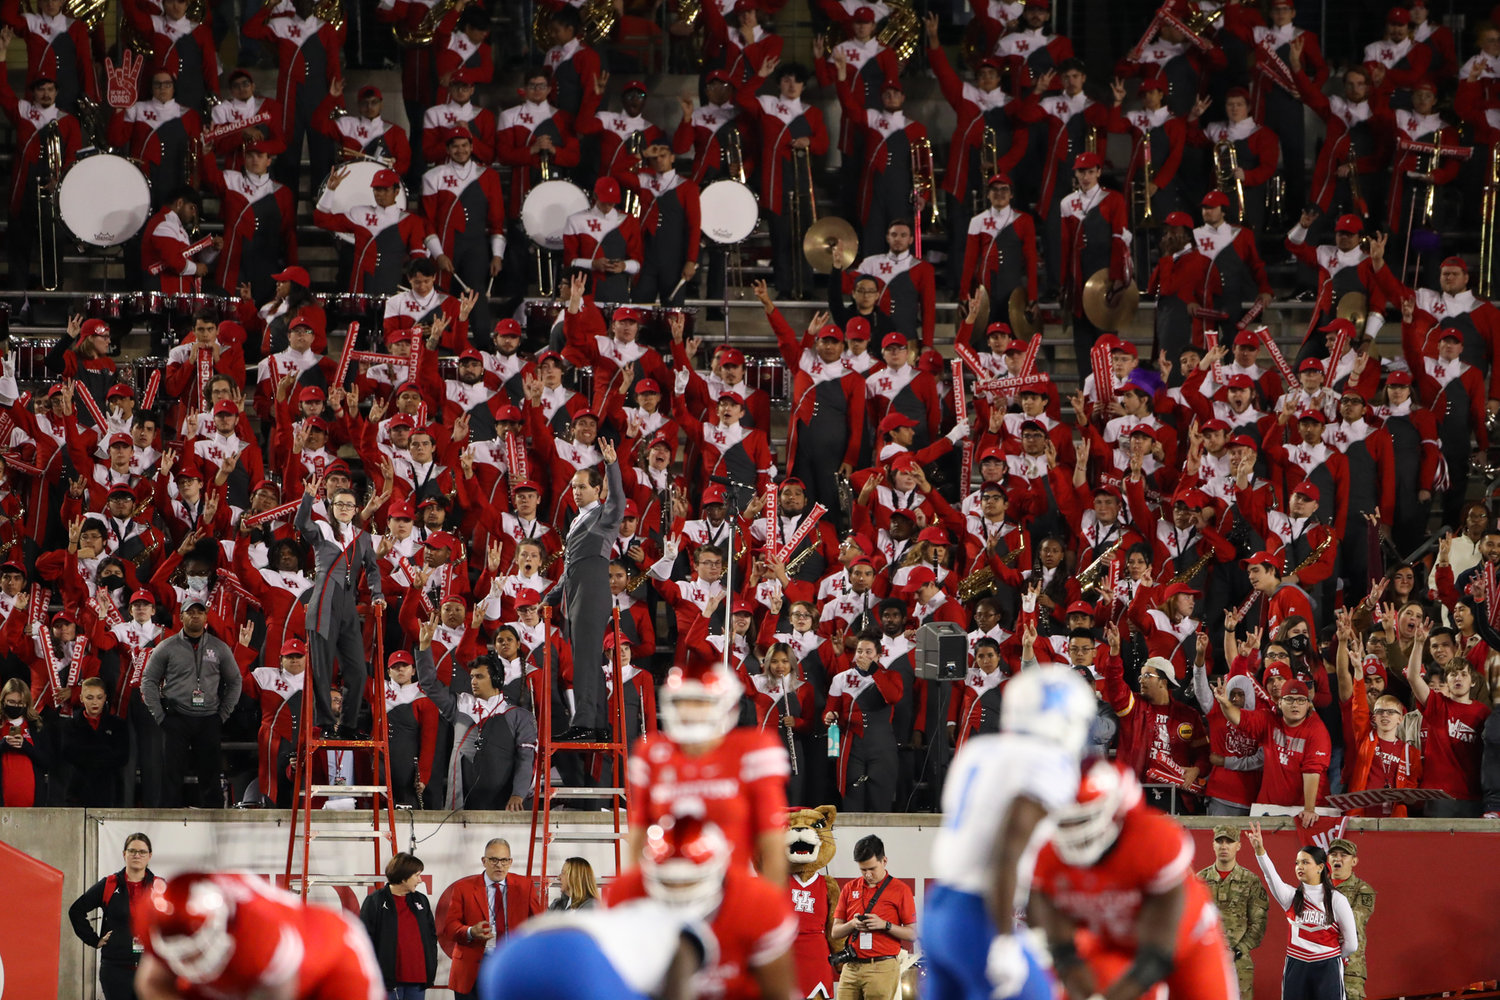 The Houston Cougars band performs during an NCAA football game between Memphis and Houston on November 19, 2021 in Houston, Texas.